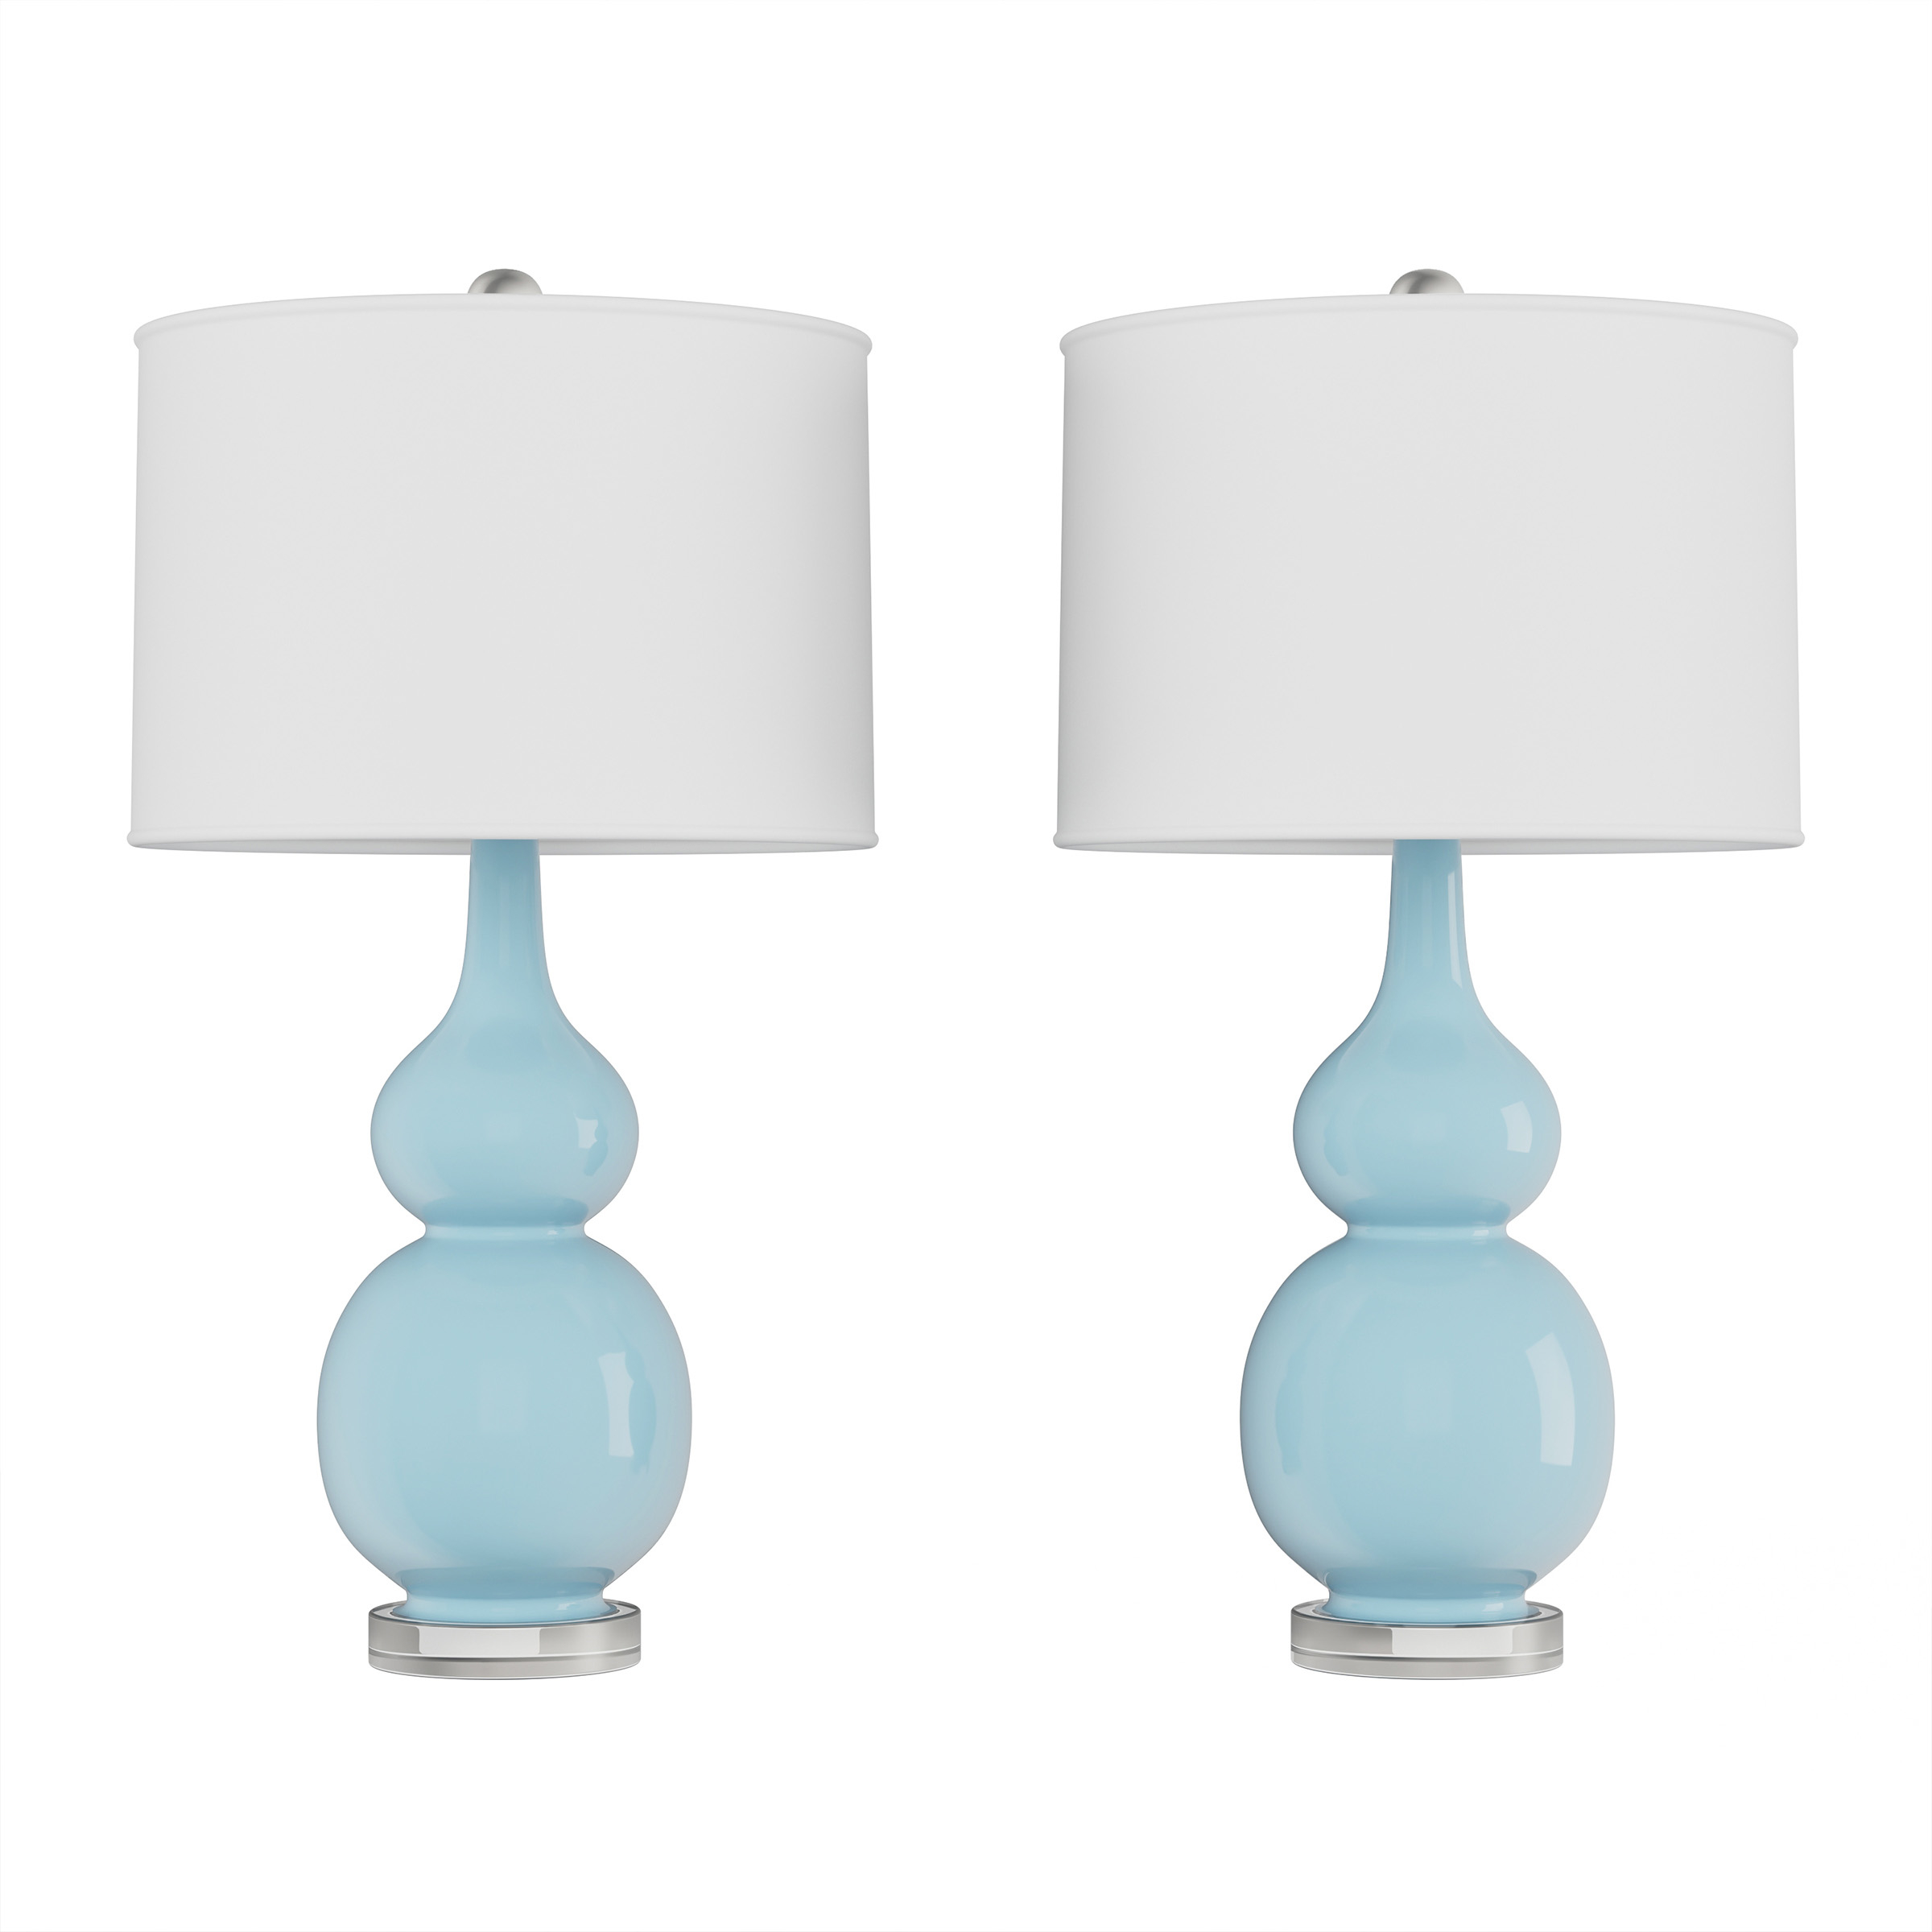 Table Lamps â Set Of 2 Ceramic Double Gourd Vintage Style For Bedroom, Living Room Or Office Baby Blue